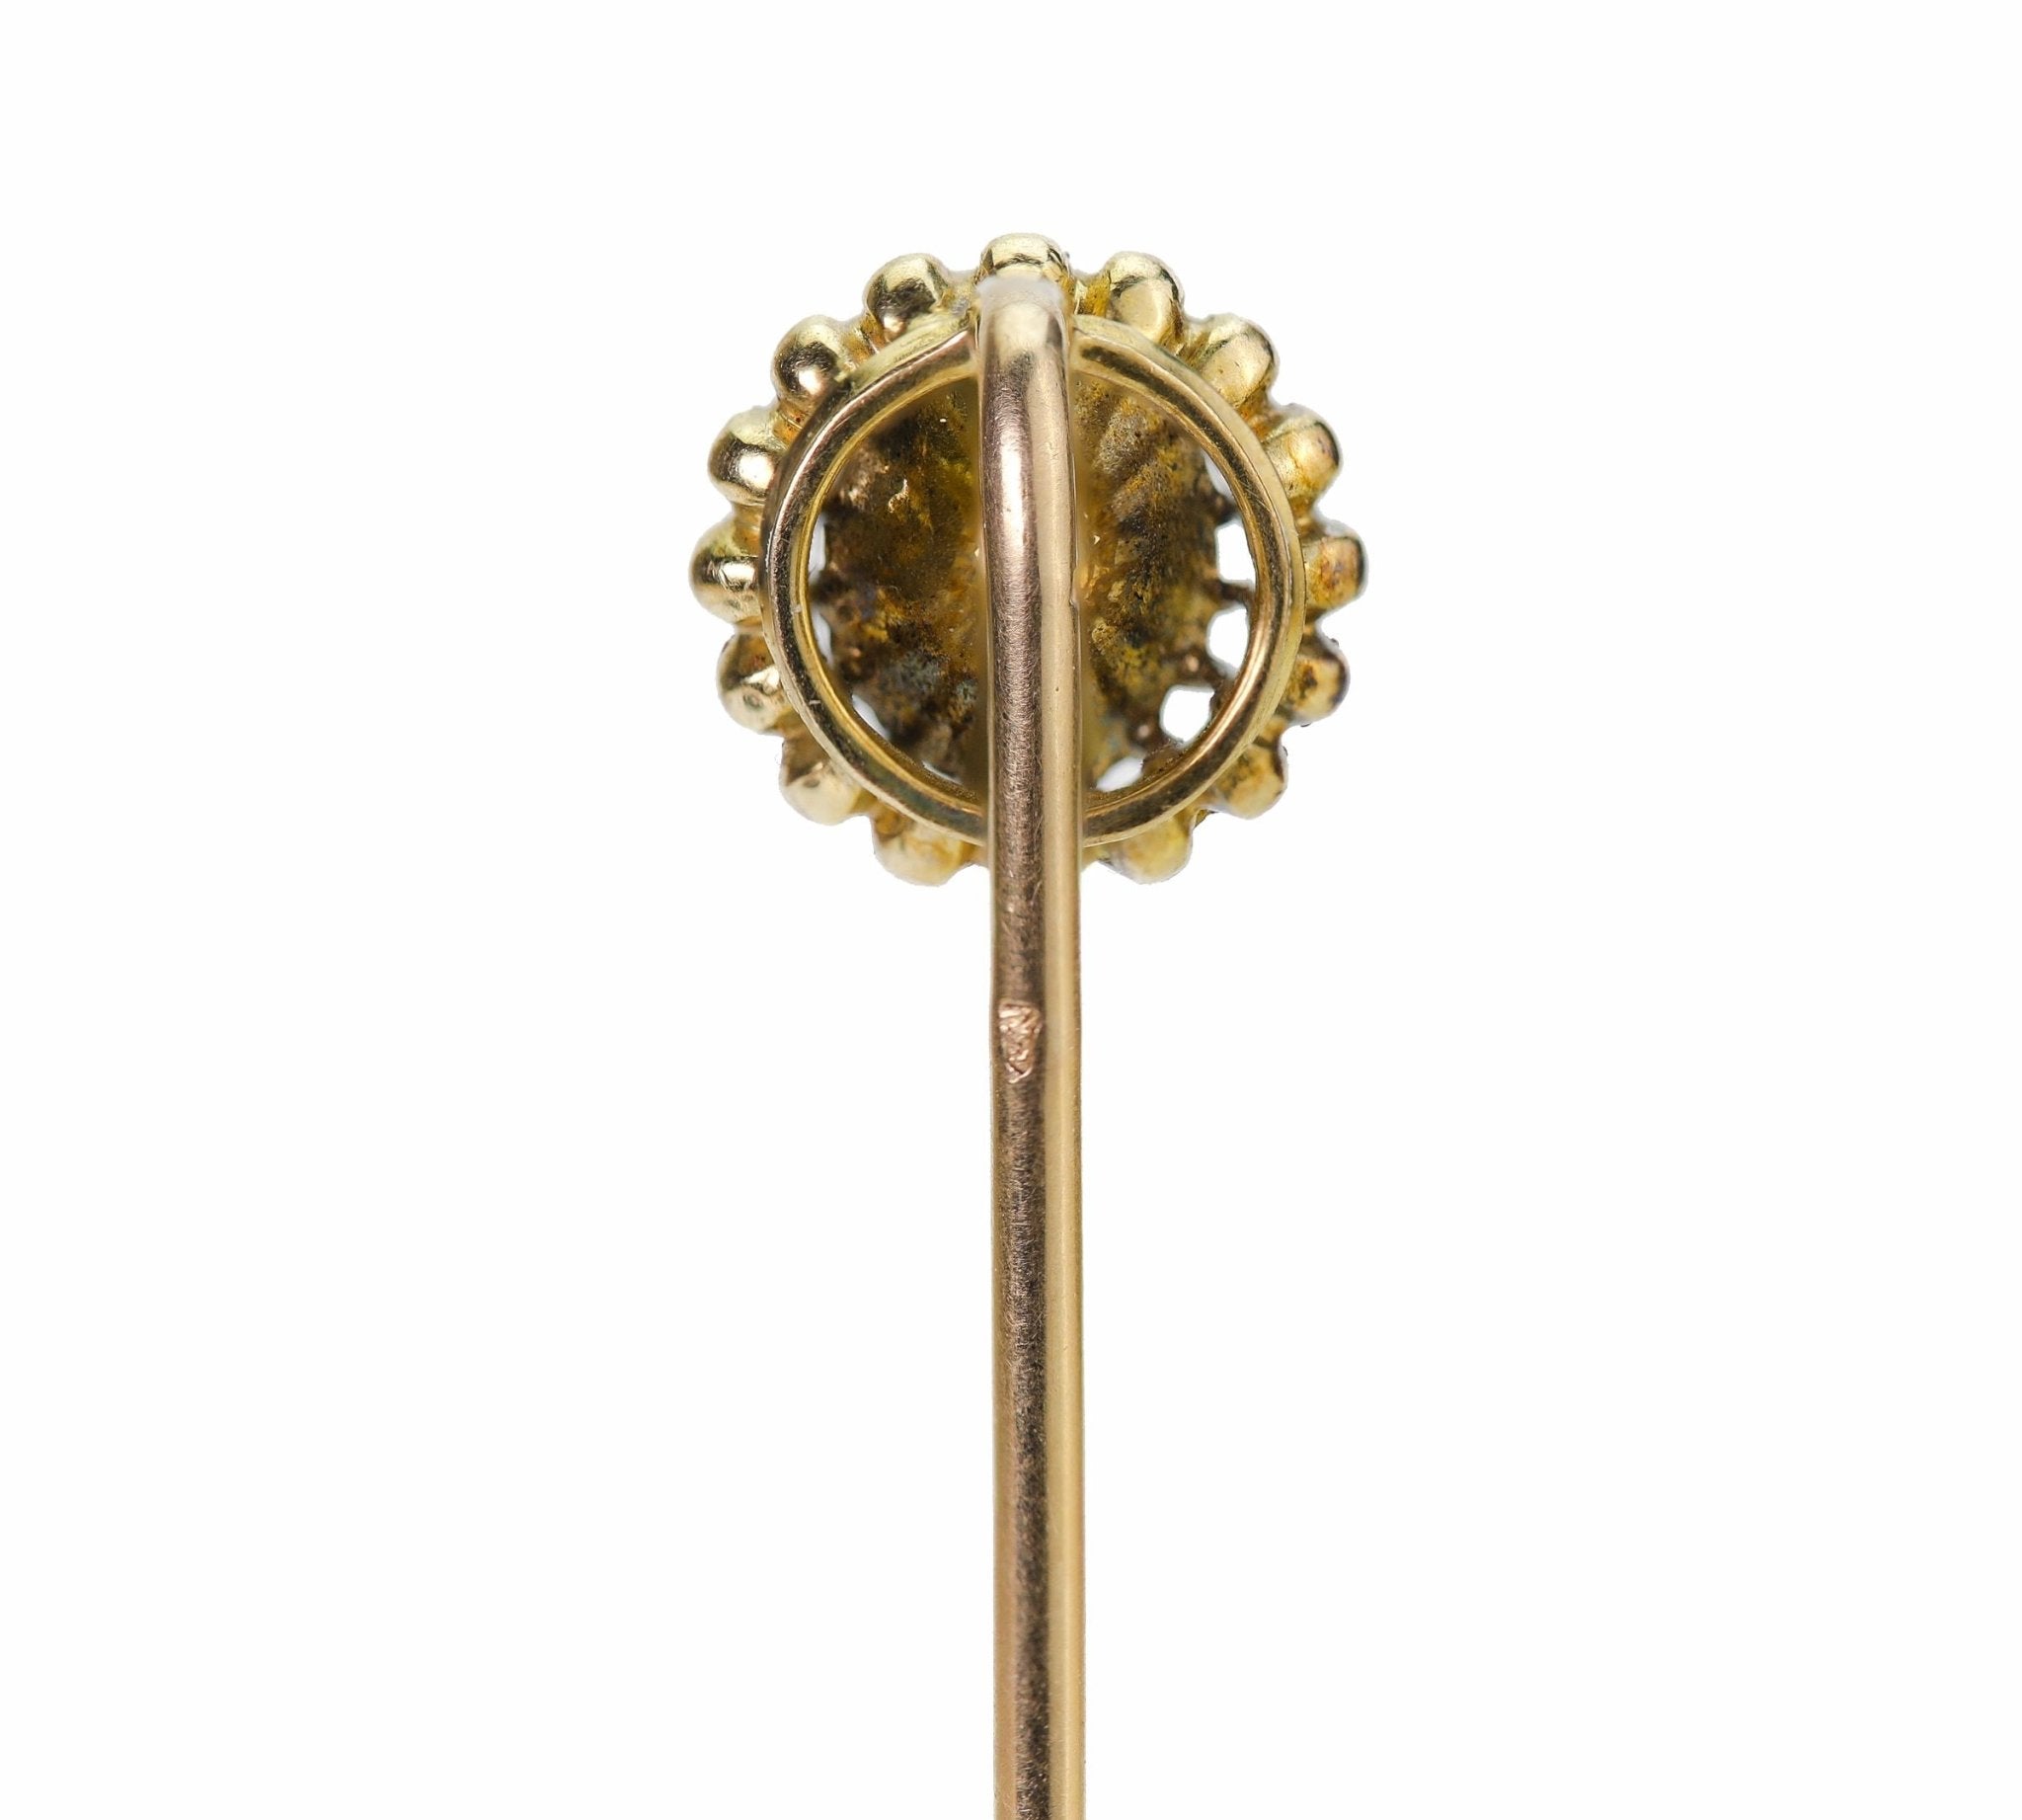 Antique French Gold Rose Cut Diamond Stick Pin - DSF Antique Jewelry